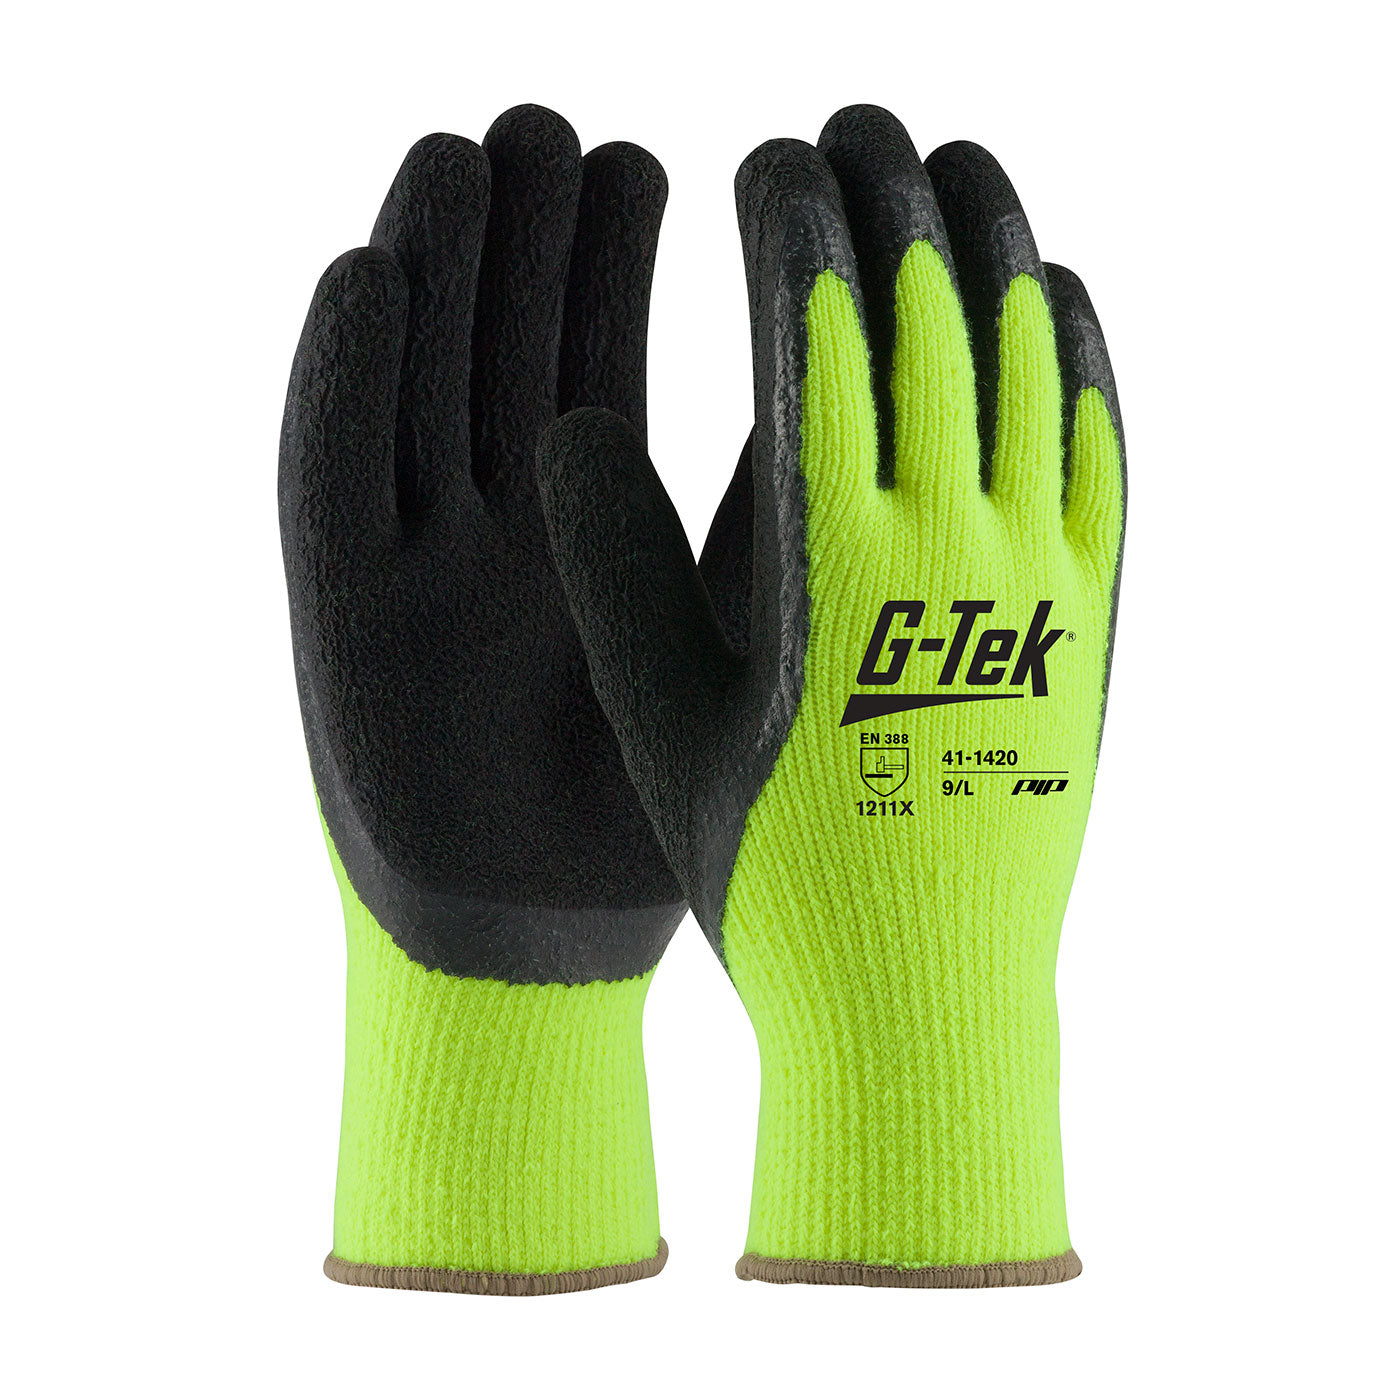 G-Tek Acrylic Knit Latex Palm Winter Work Gloves - Pack of 12 Pairs Work Gloves and Hats - Cleanflow